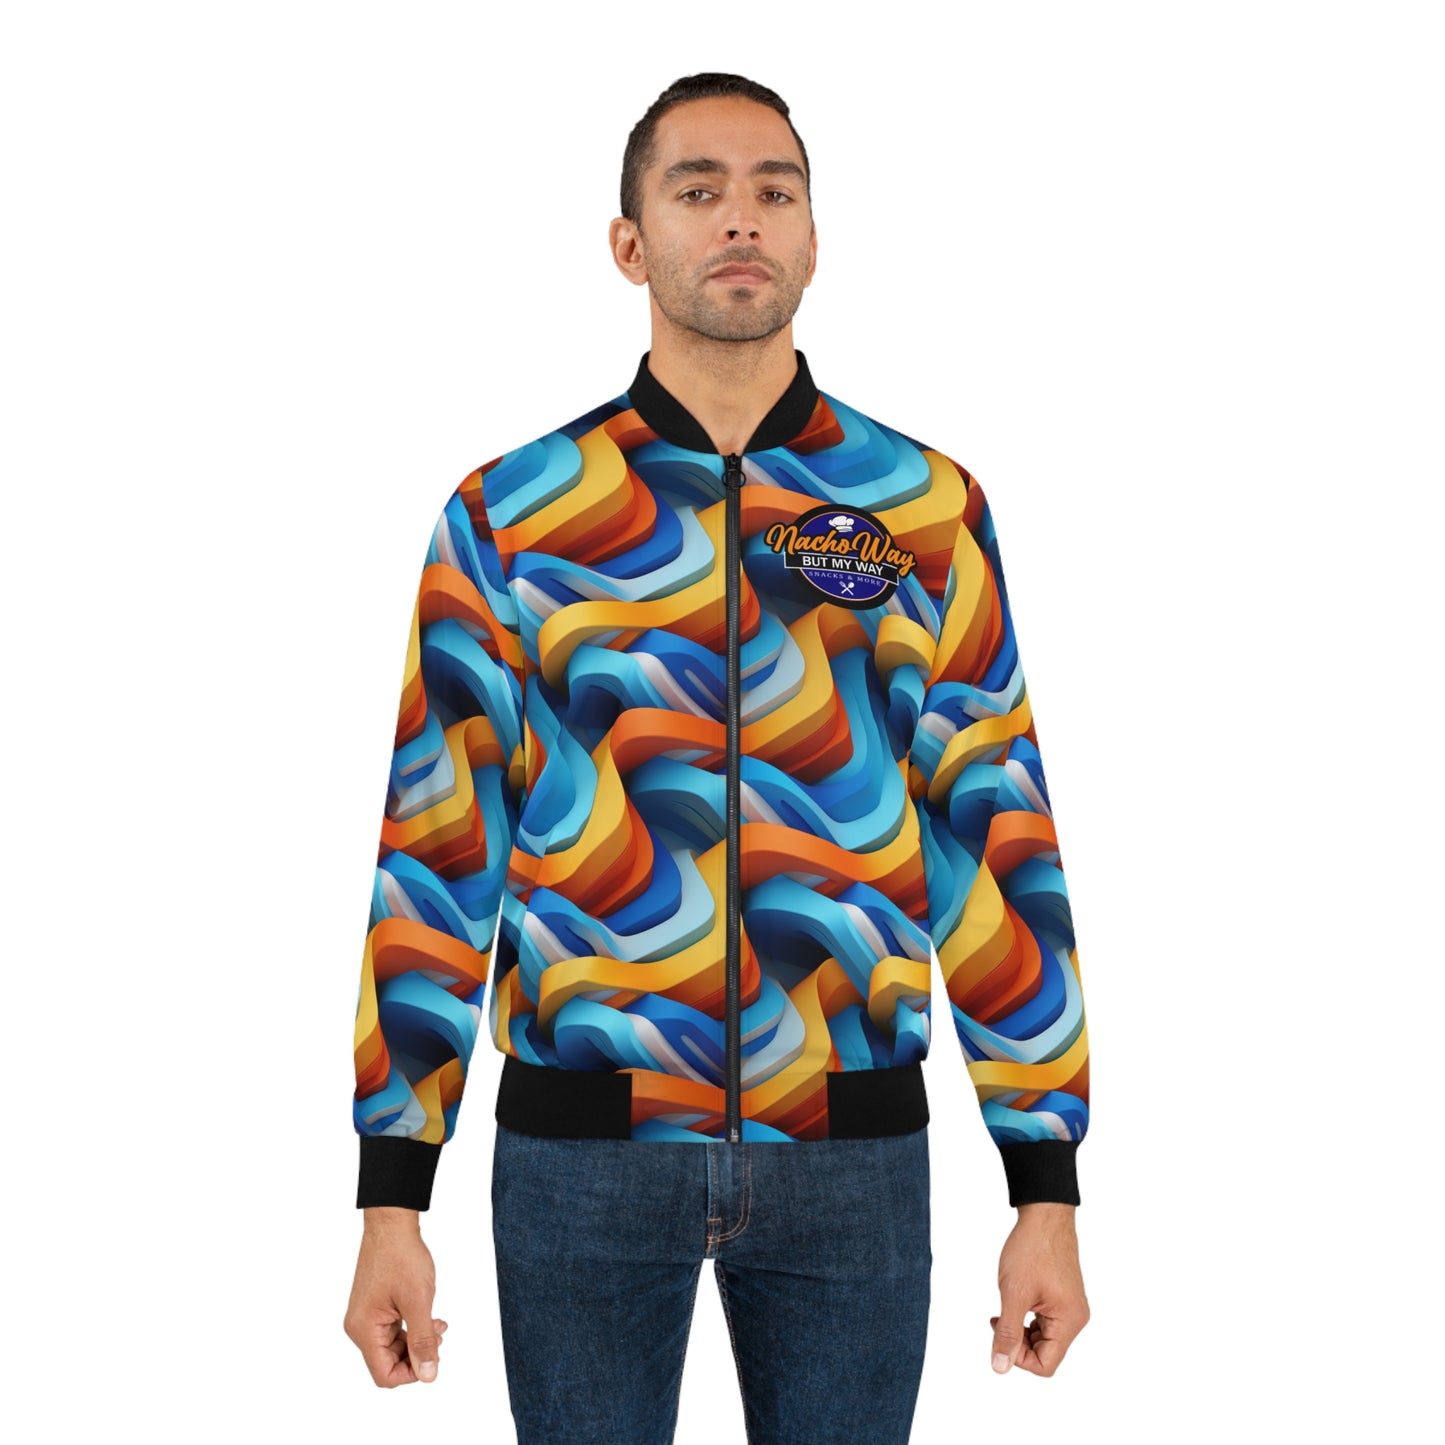 NachoWay “Go With The Flow” Bomber Jacket